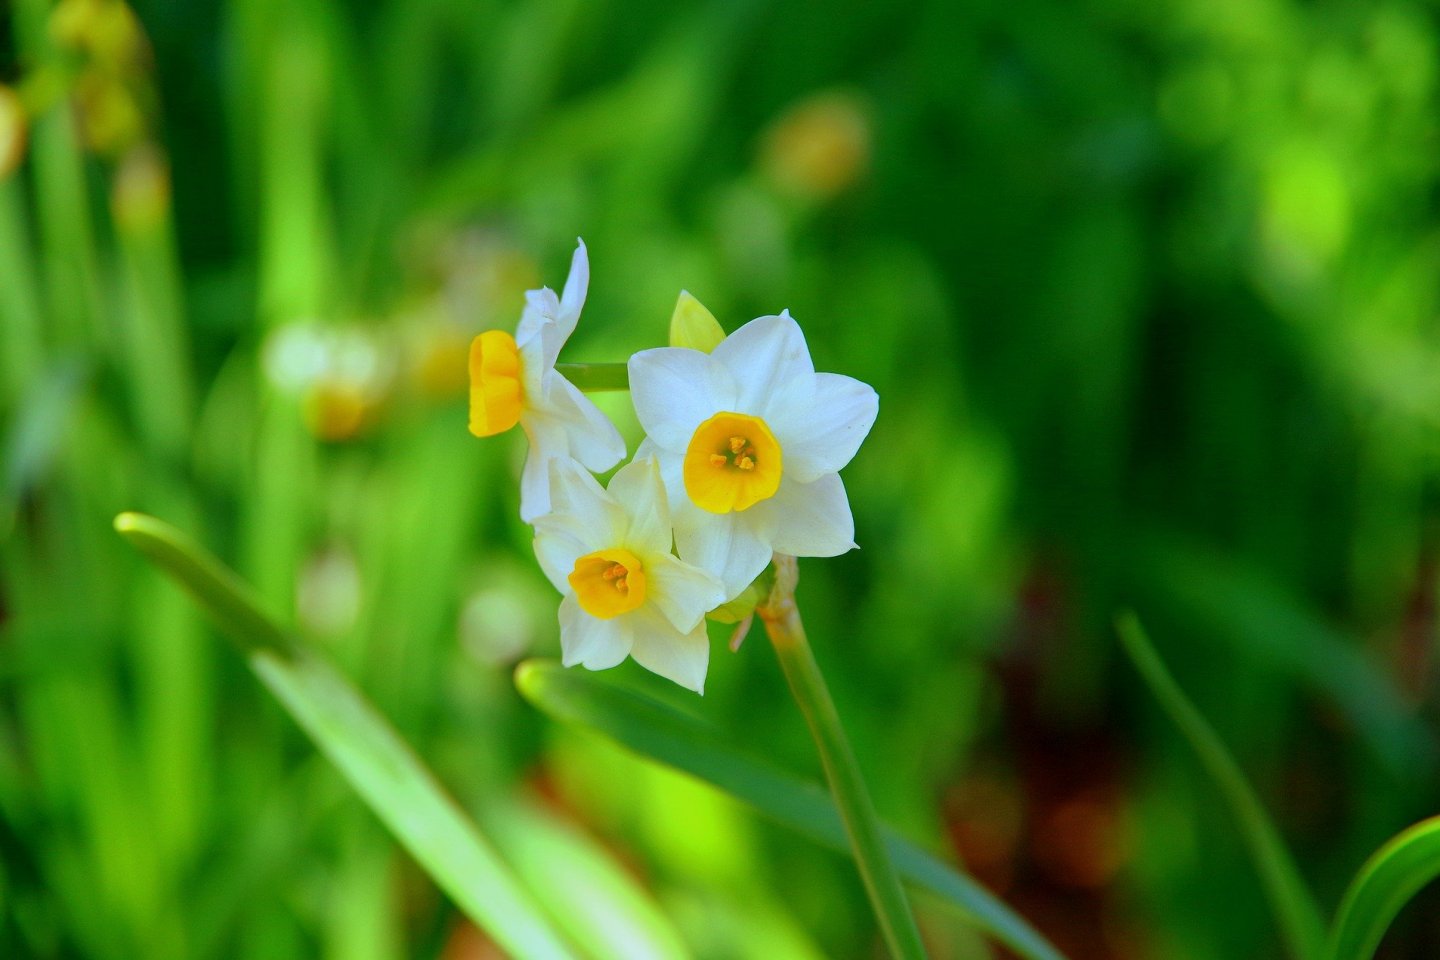 Japanese narcissus are a winter highlight